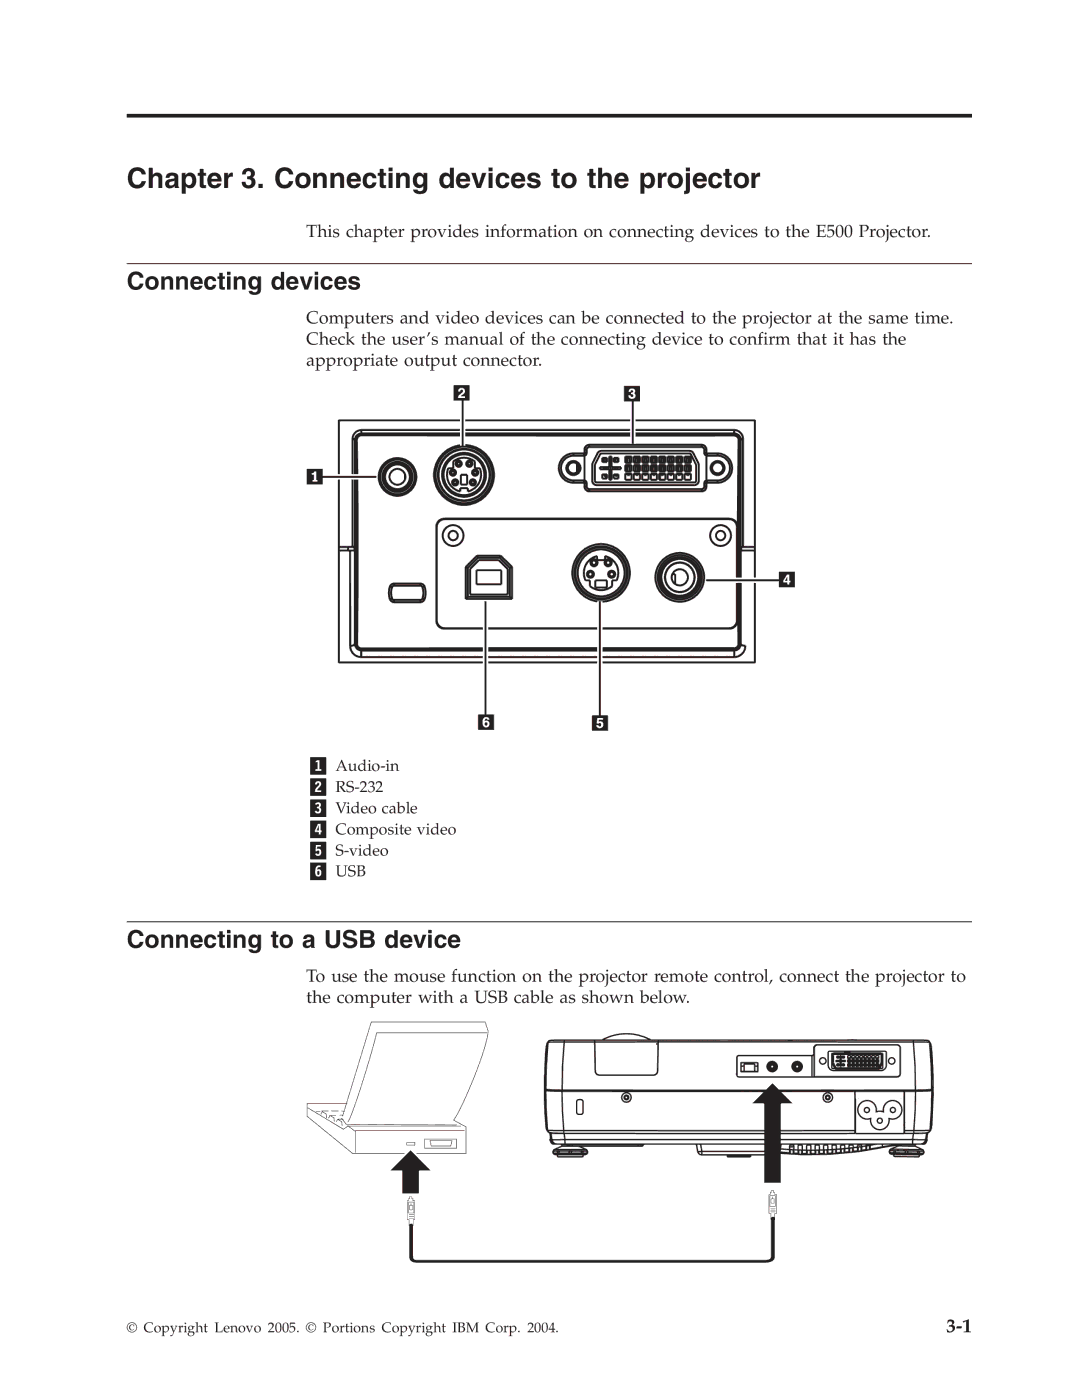 Lenovo E500 manual Connecting devices to the projector, Connecting to a USB device 